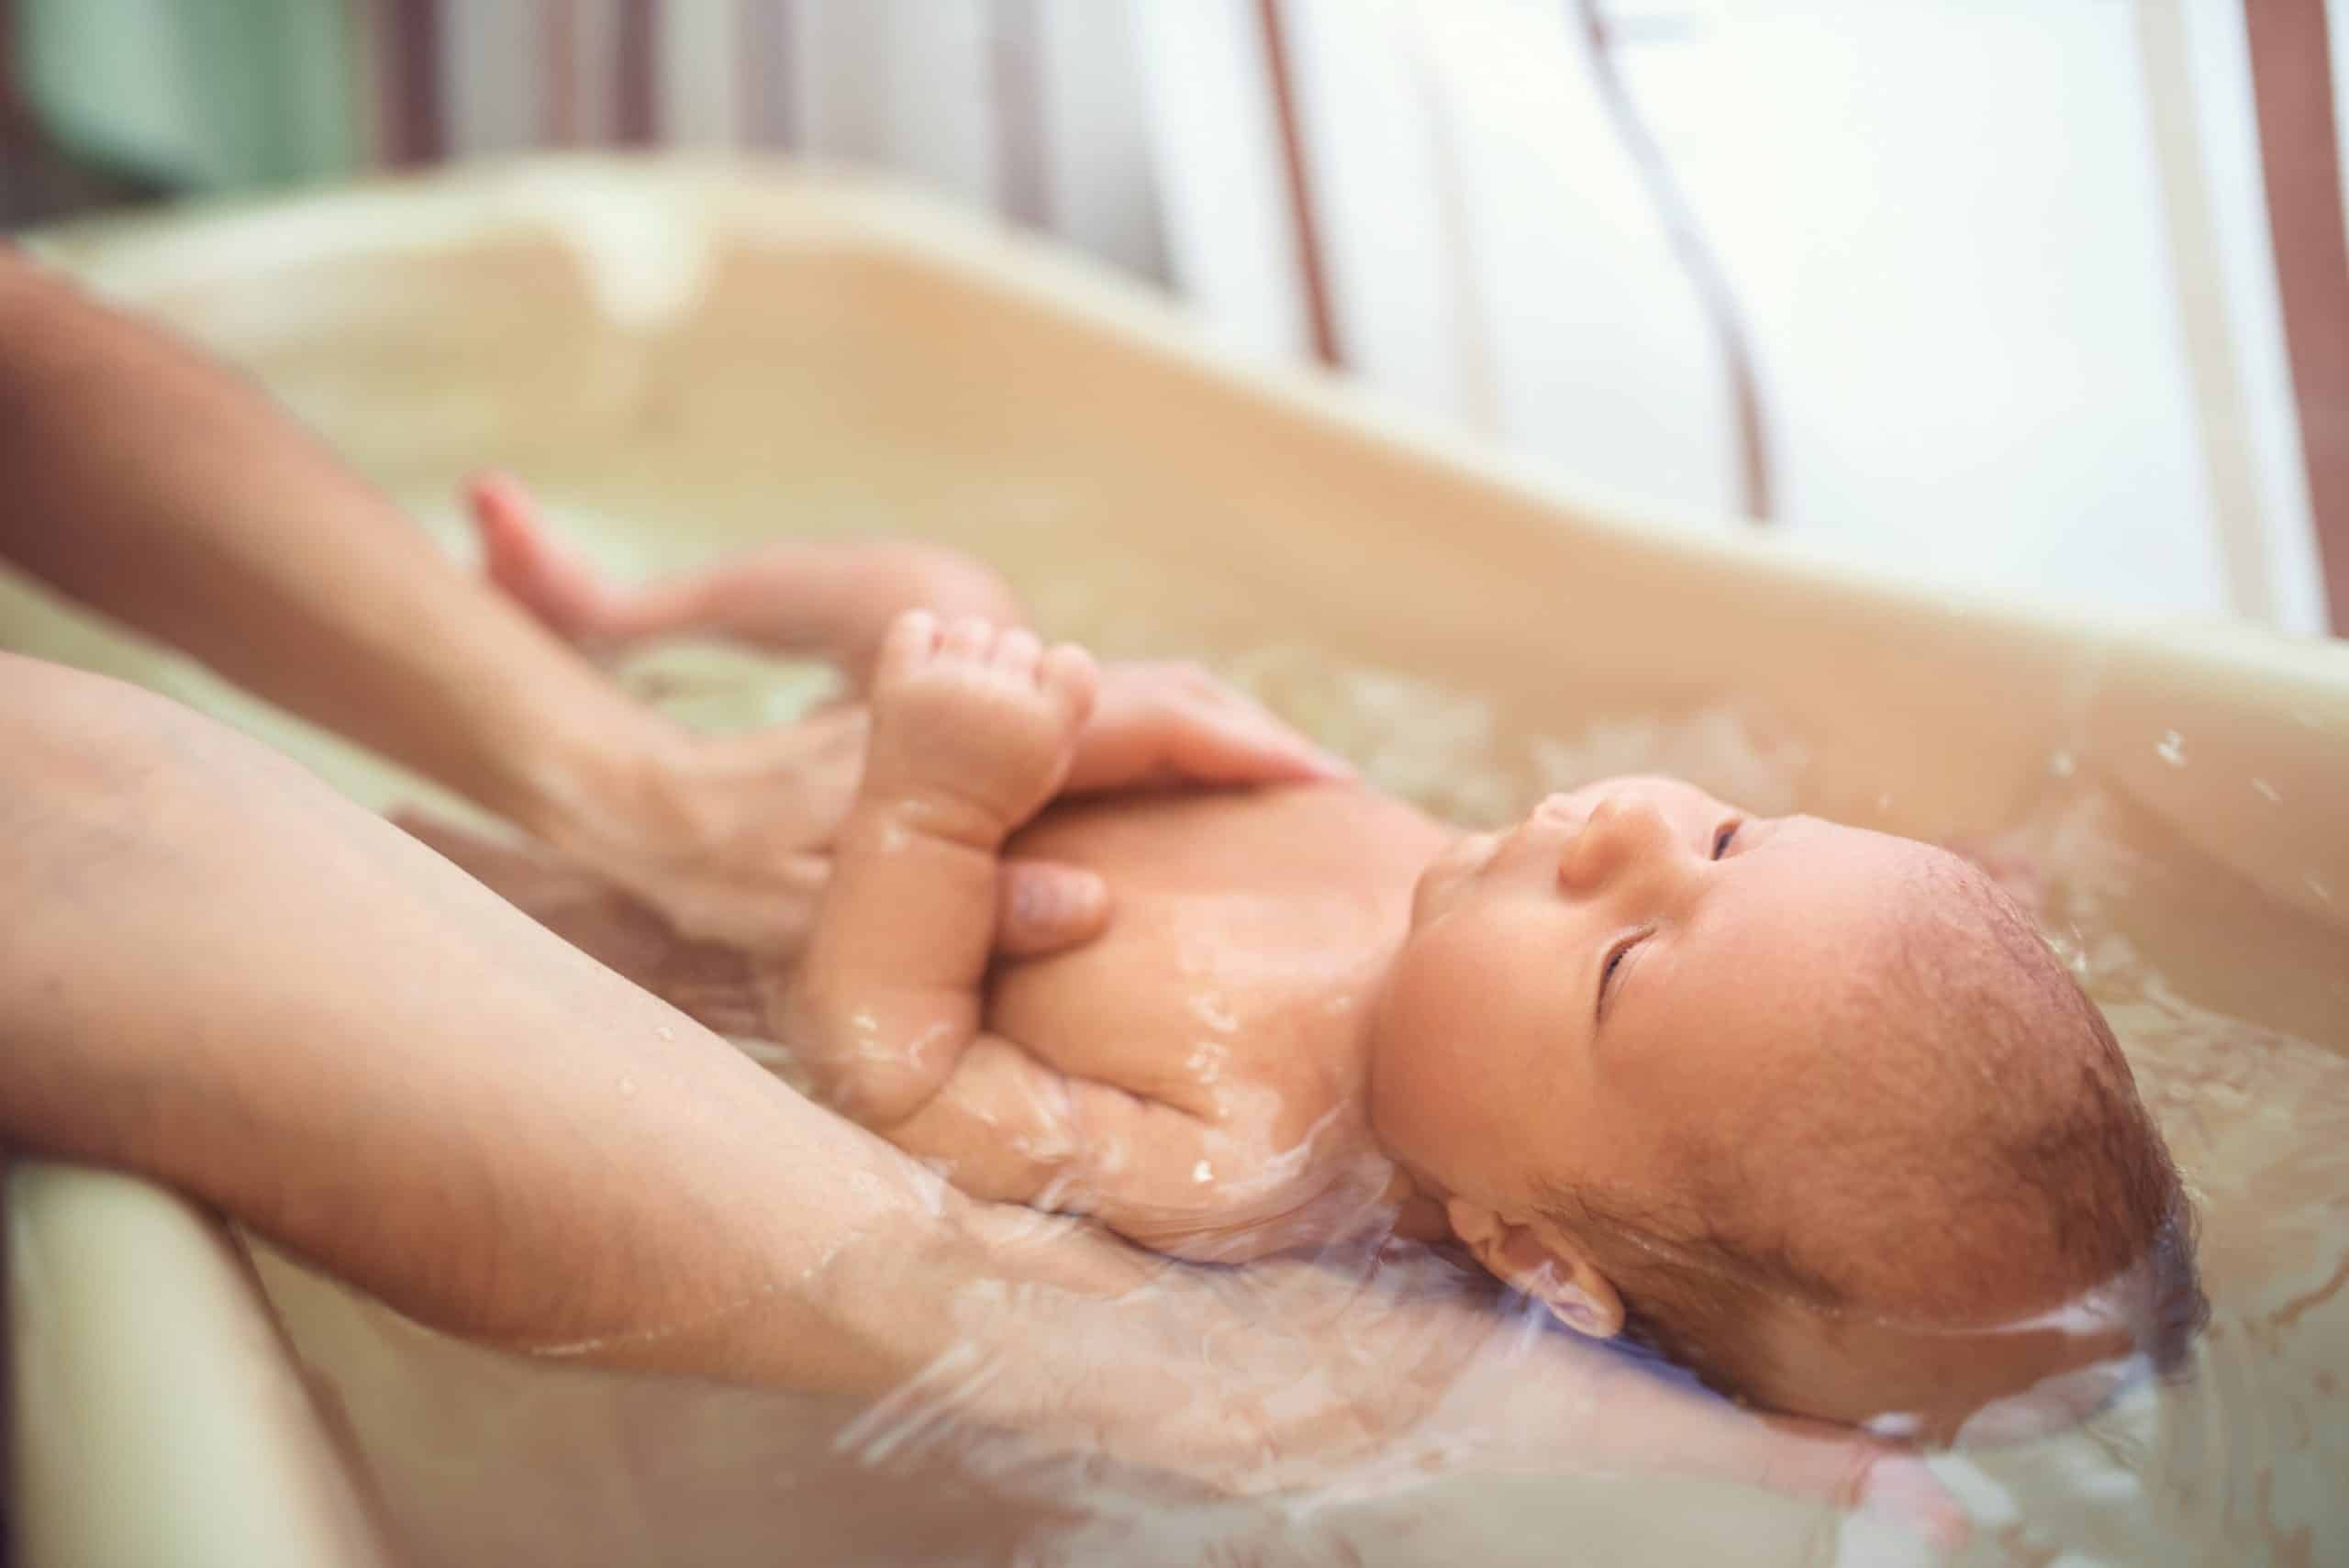 what temperature should a baby bath be